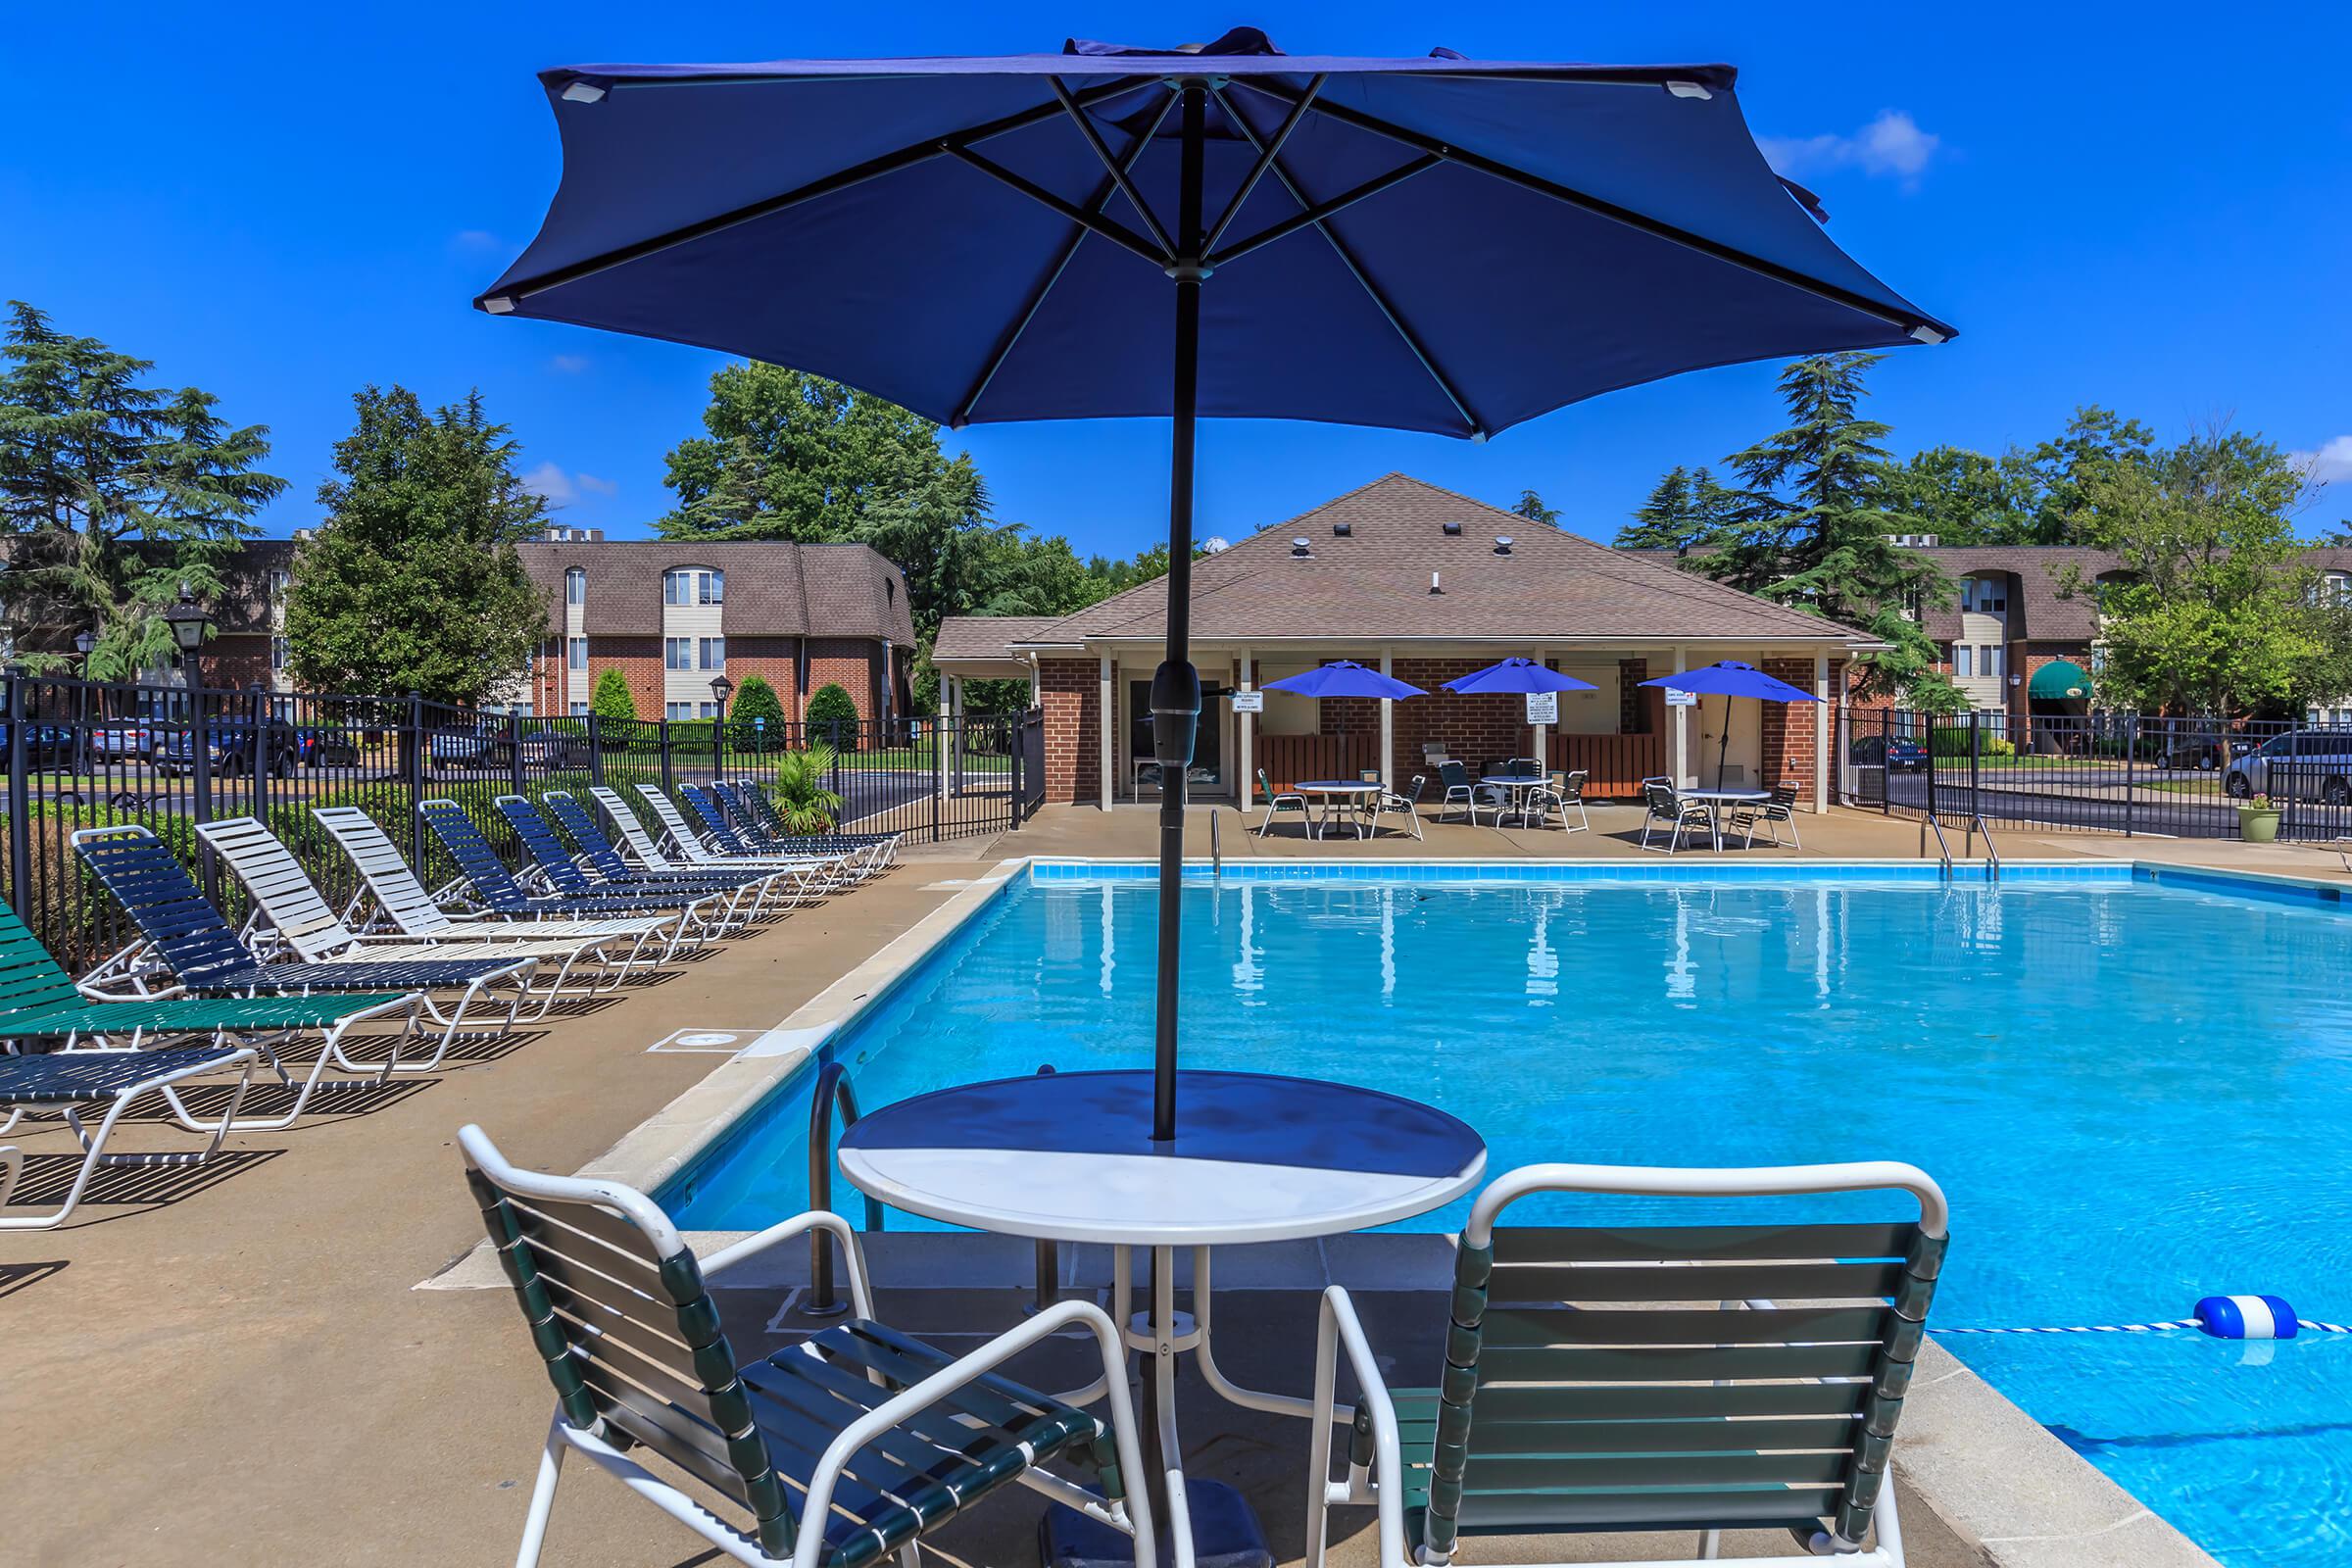 a group of lawn chairs sitting on a pool table with a blue umbrella